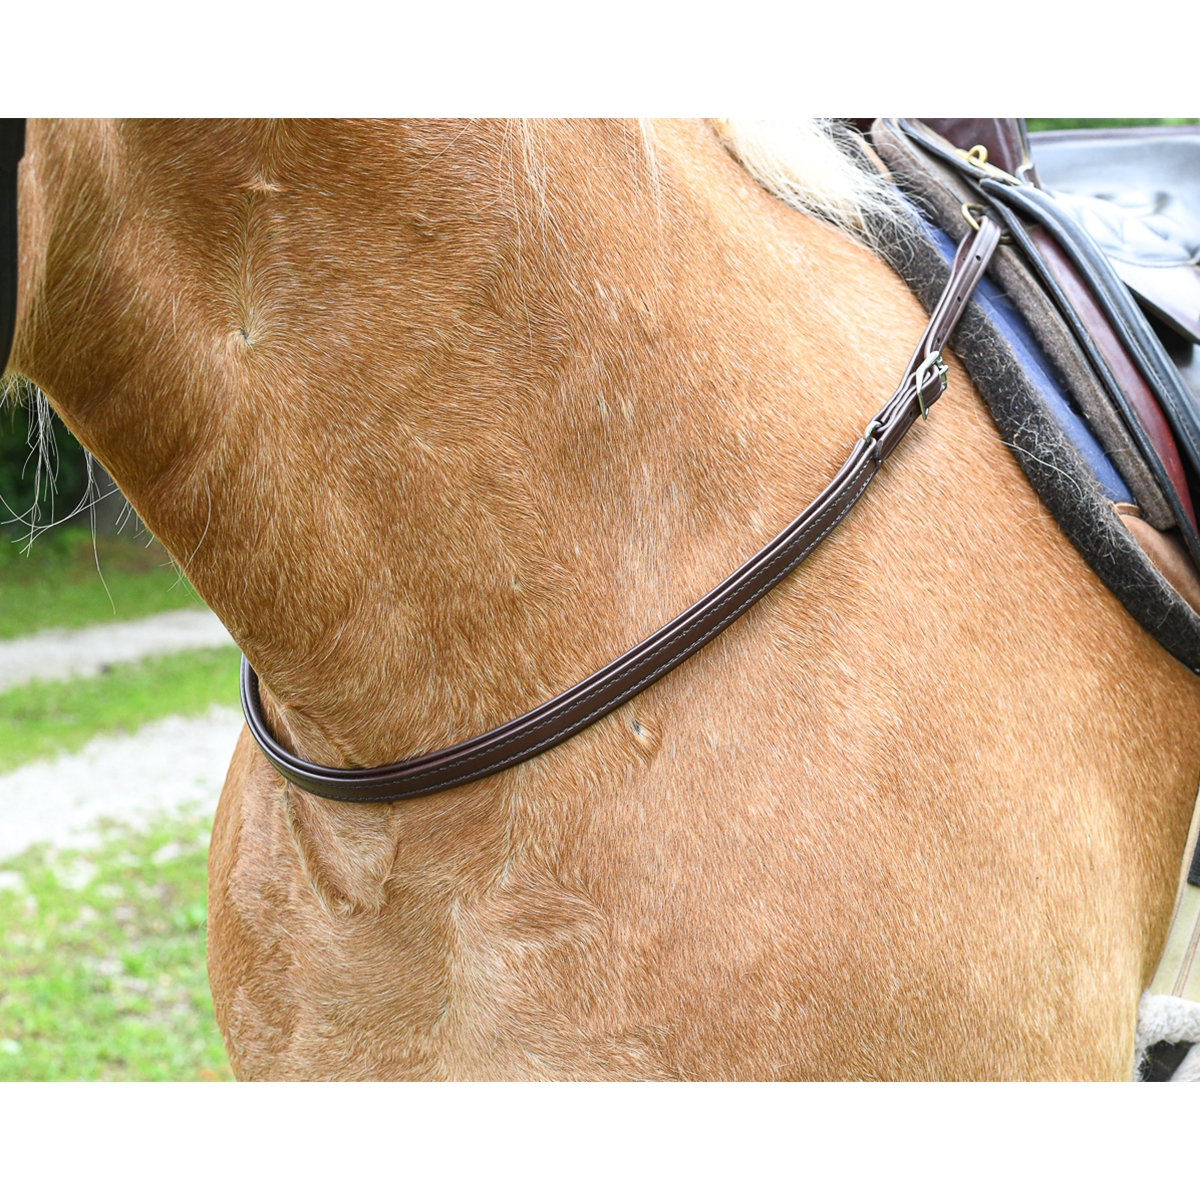 English Bridle/Harness Leather Straps, 1.5